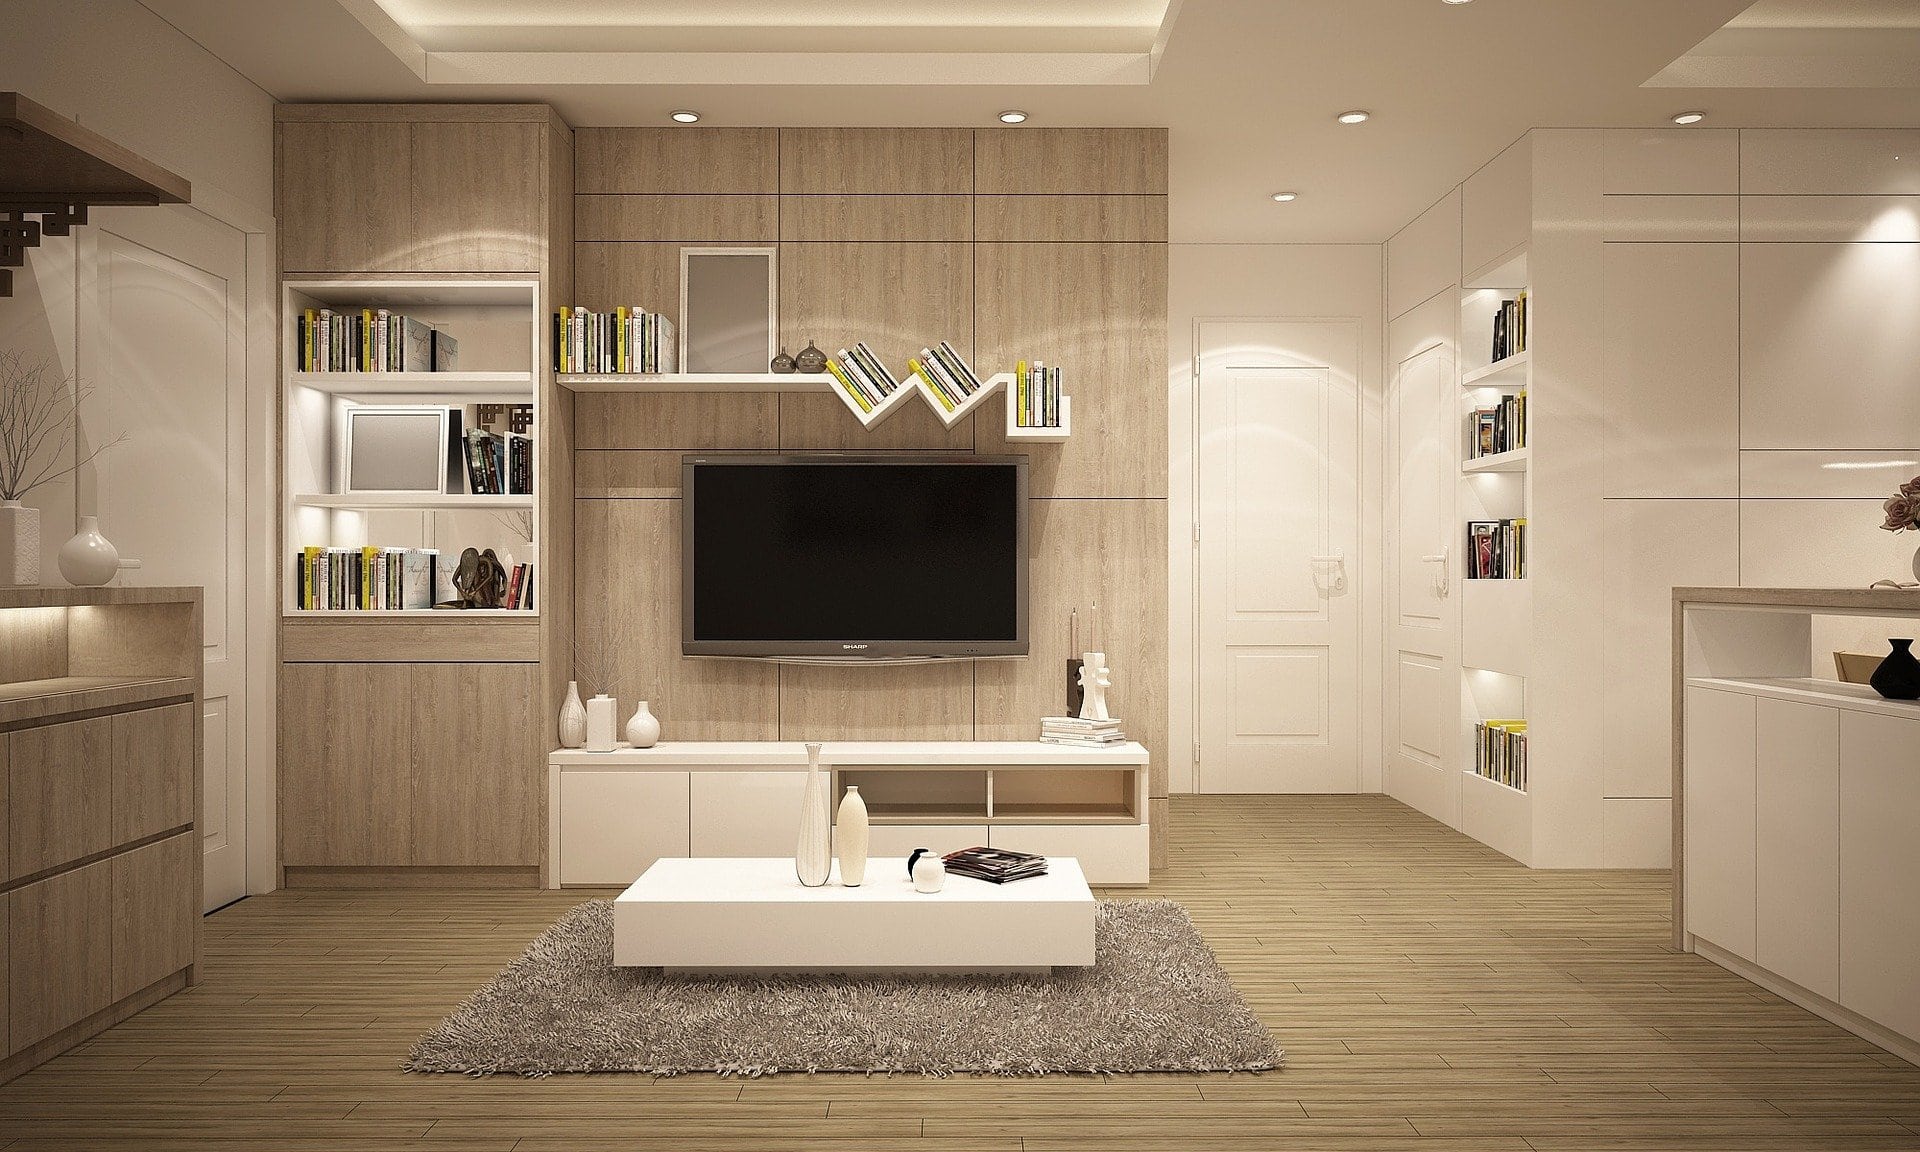 A modern living room interior with neutral colors.